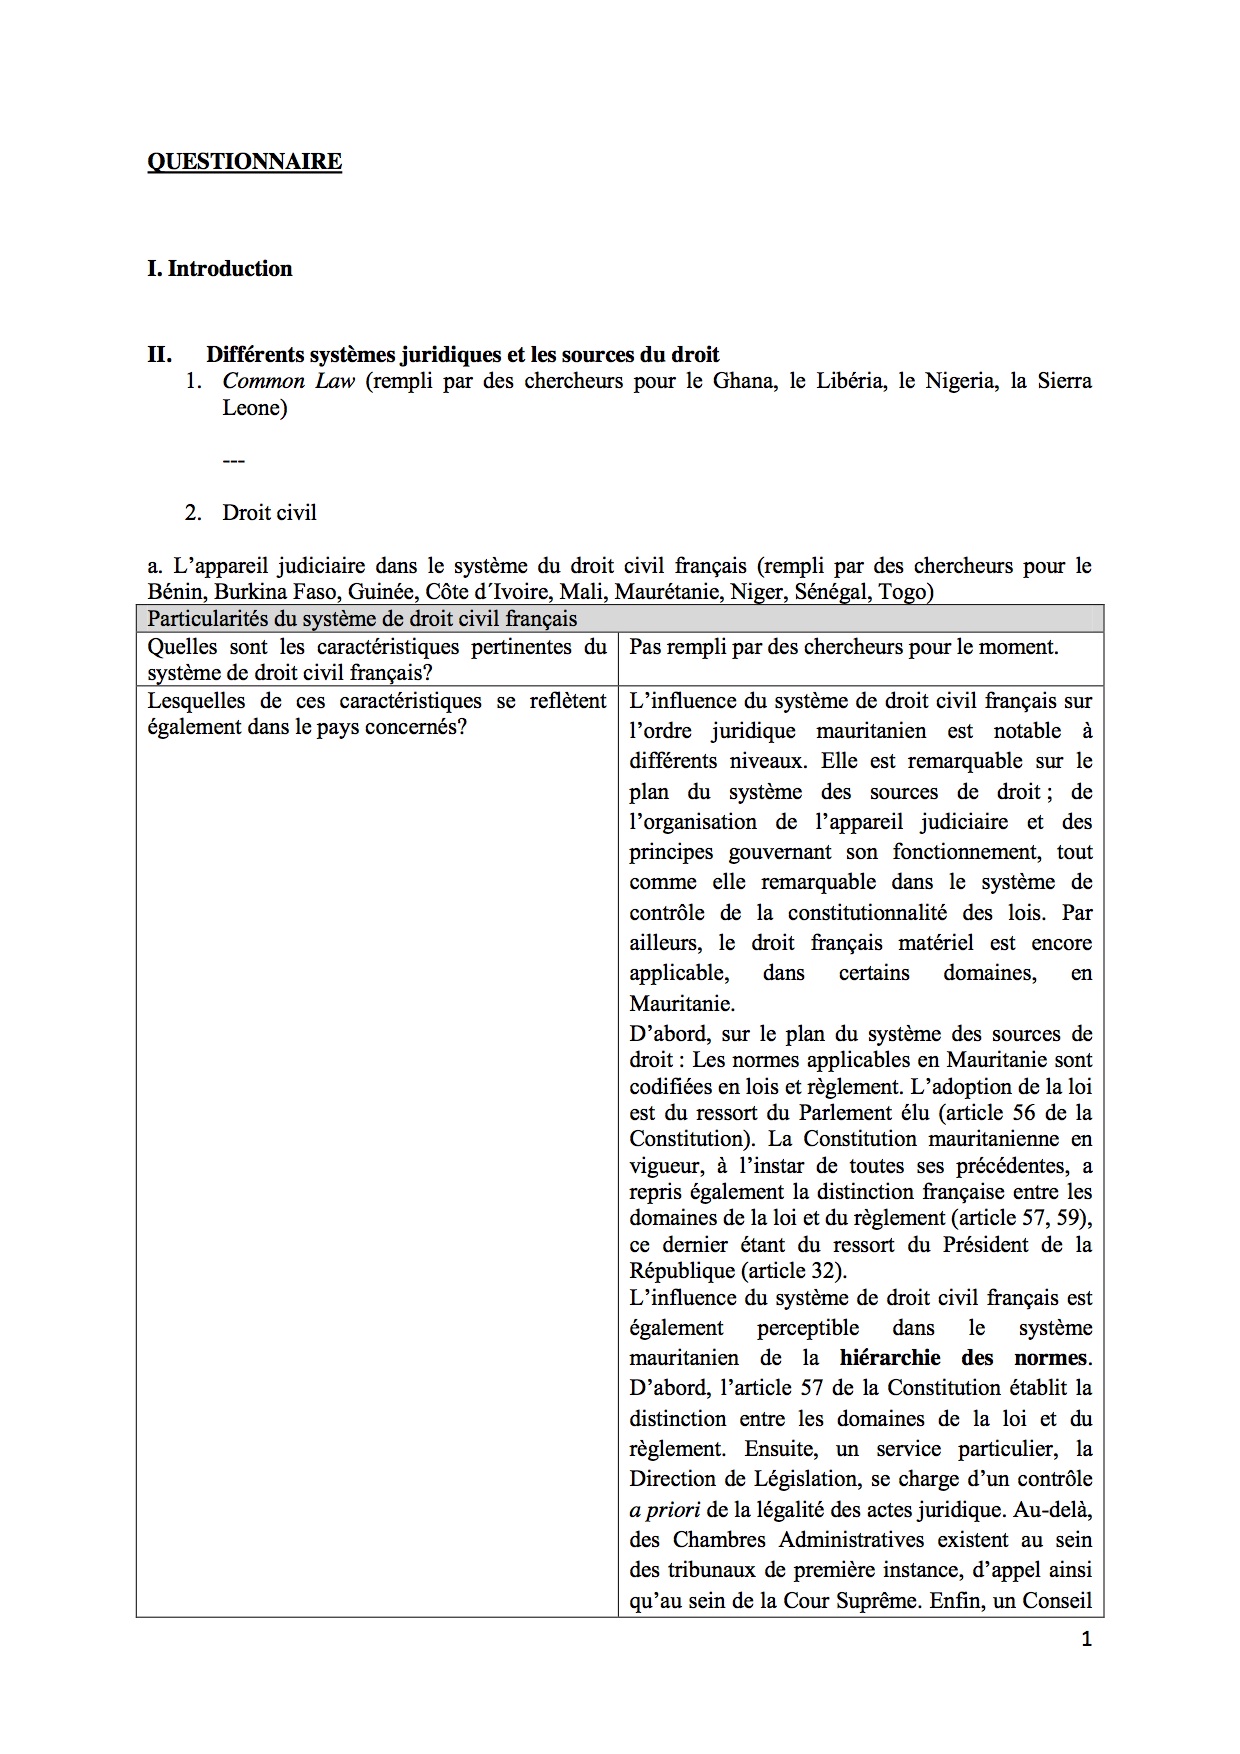 Rule of Law Questionnaire - Mauritania